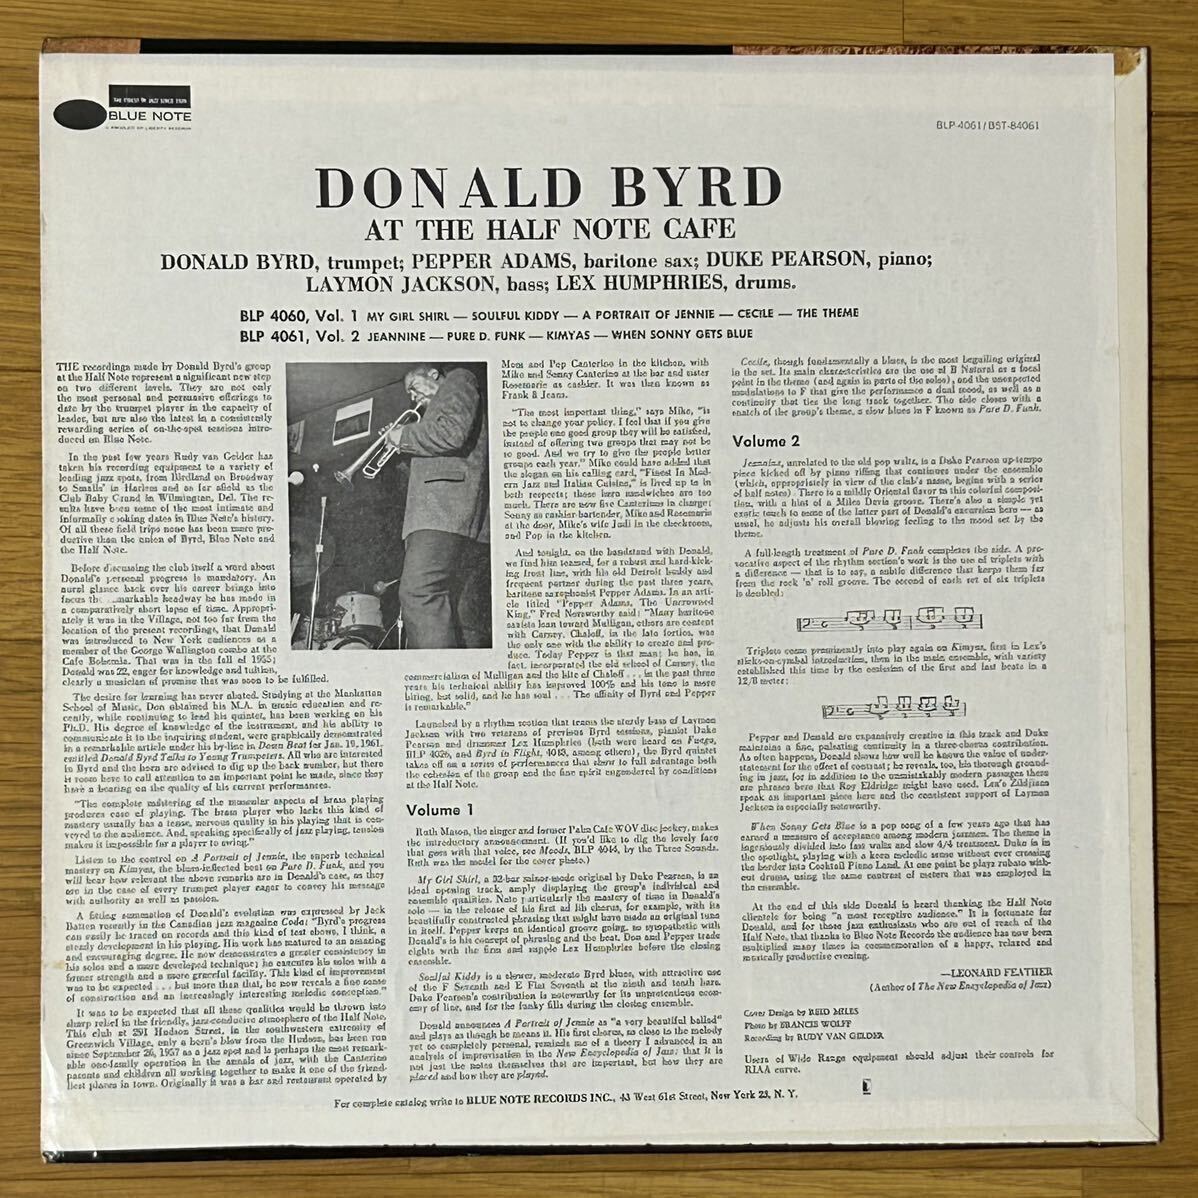 【RVG刻印あり】US盤 Stereo At The Half Note Cafe, Vol. 2 / Donald Byrd Blue Note BST 80461 超音波洗浄済 Duke Pearson参加_画像2